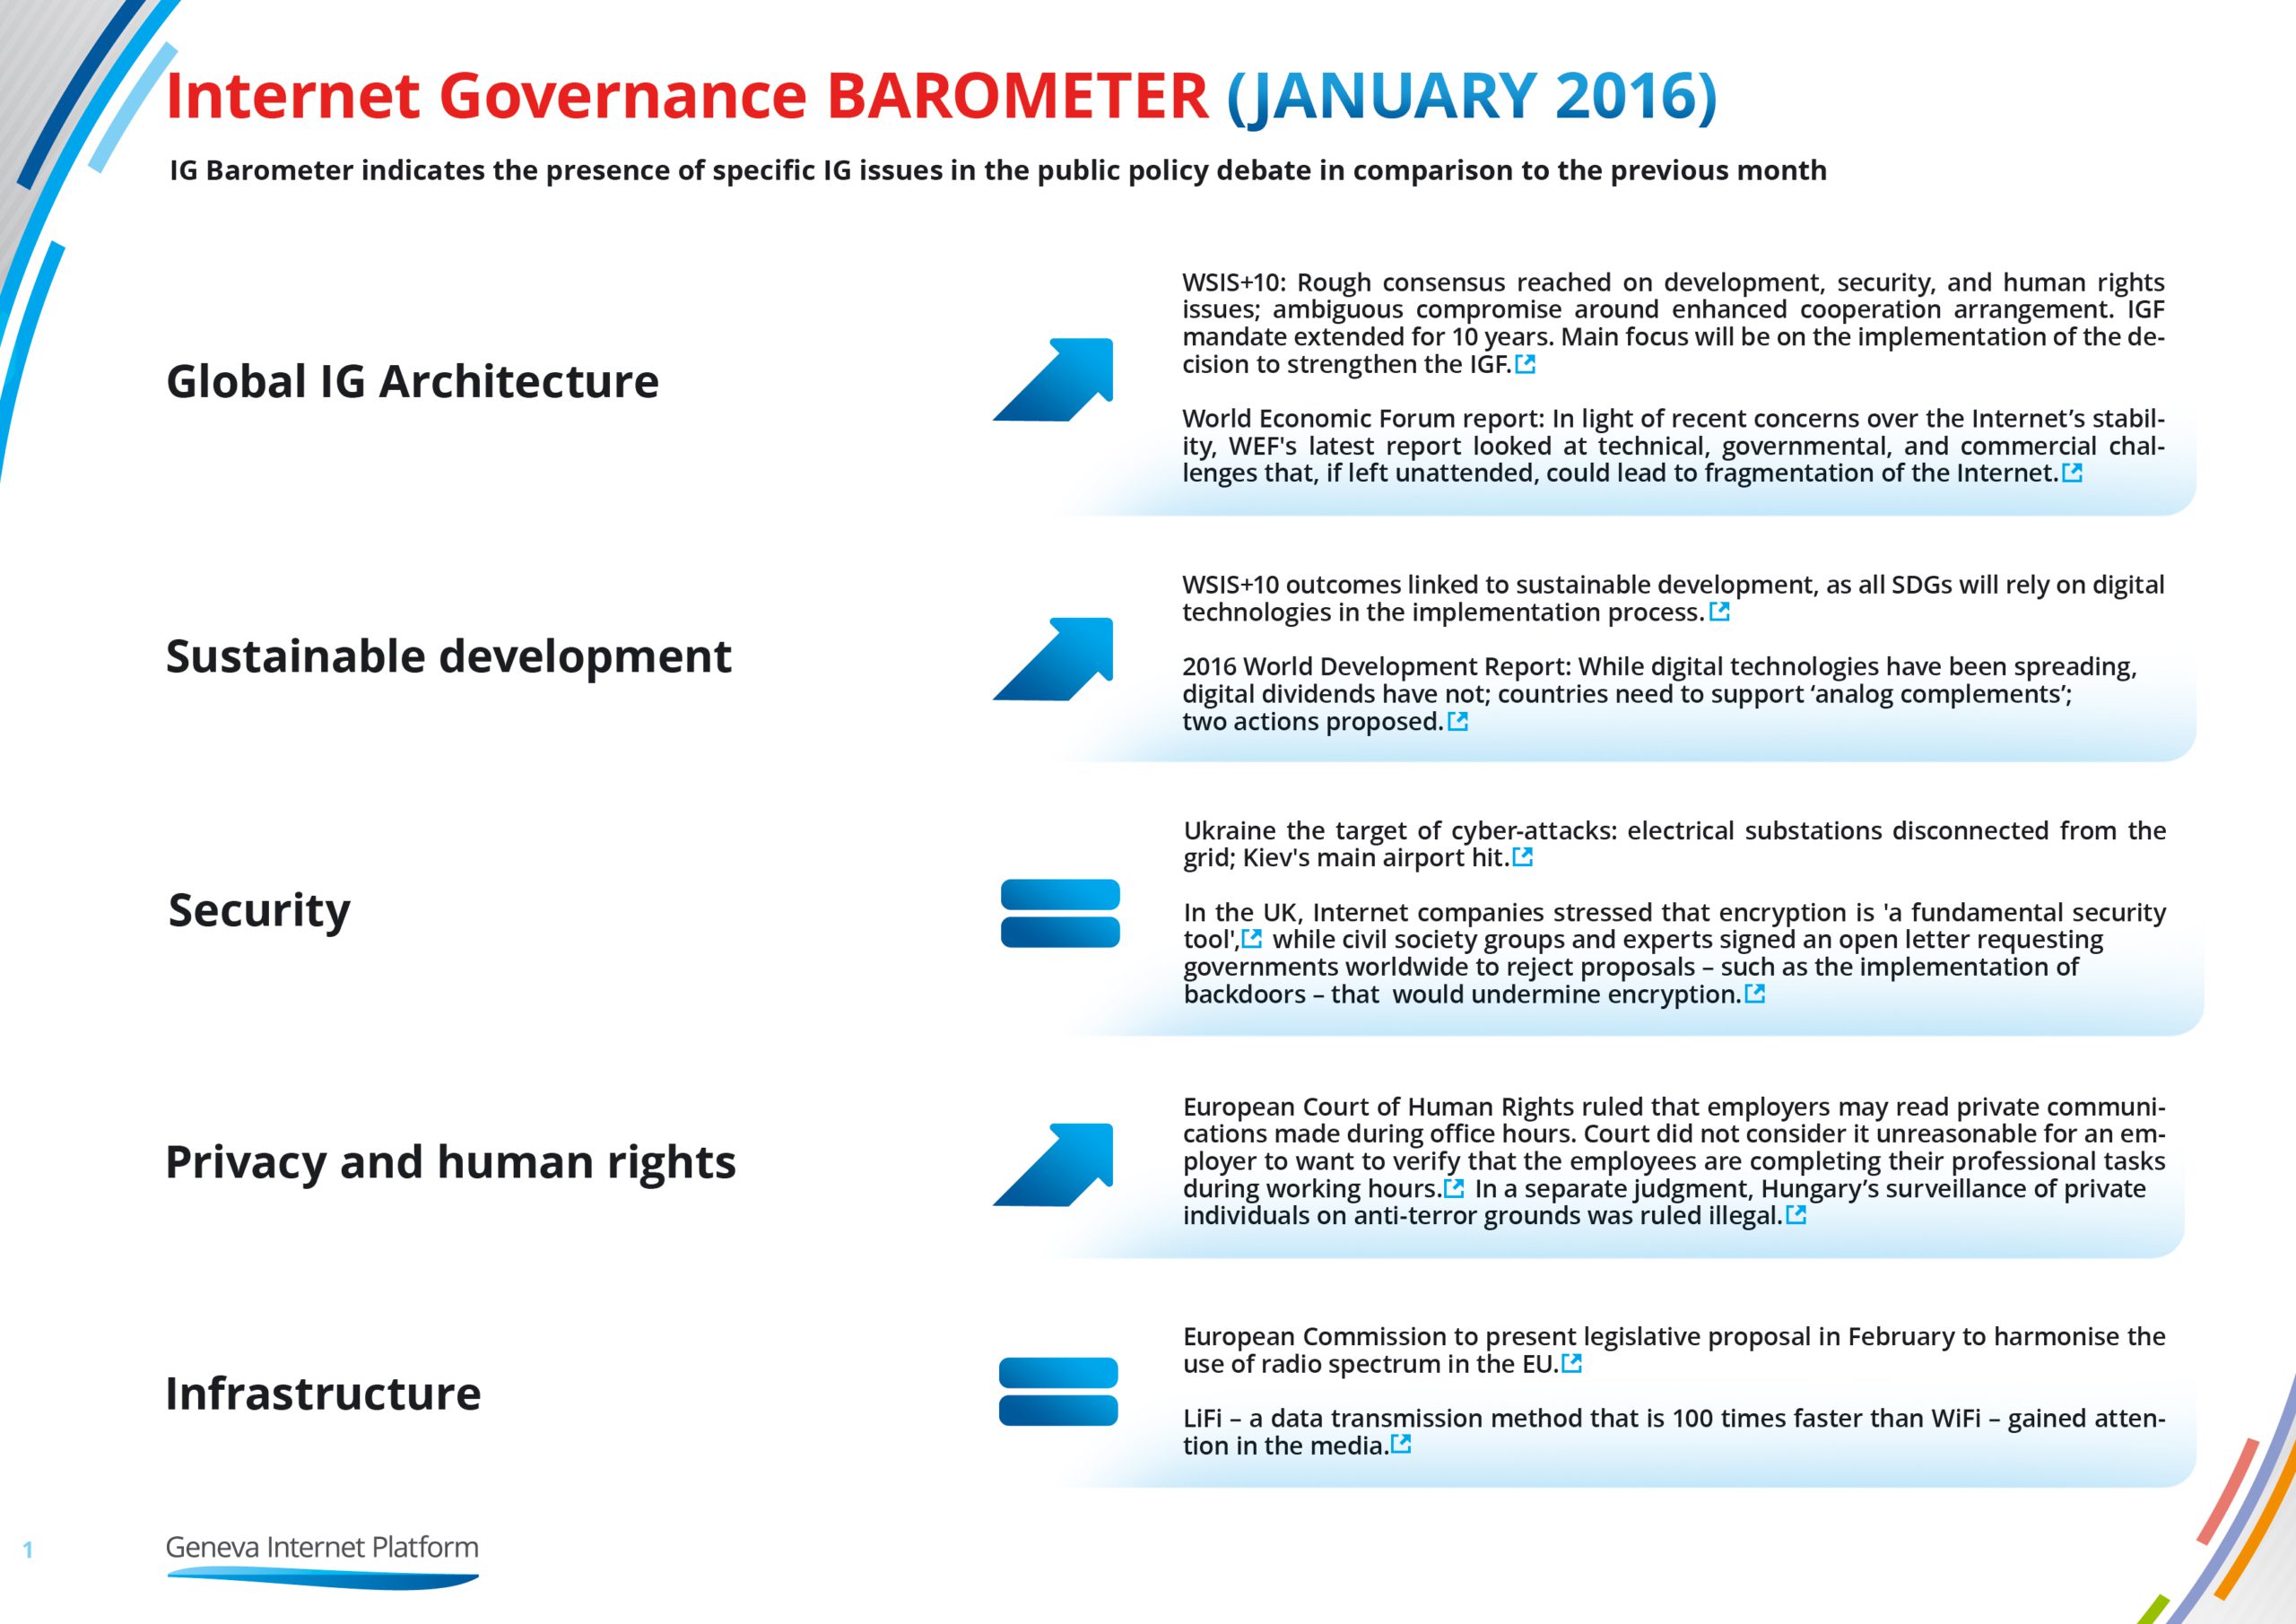 IG-Barometer-for-January-2016-scaled